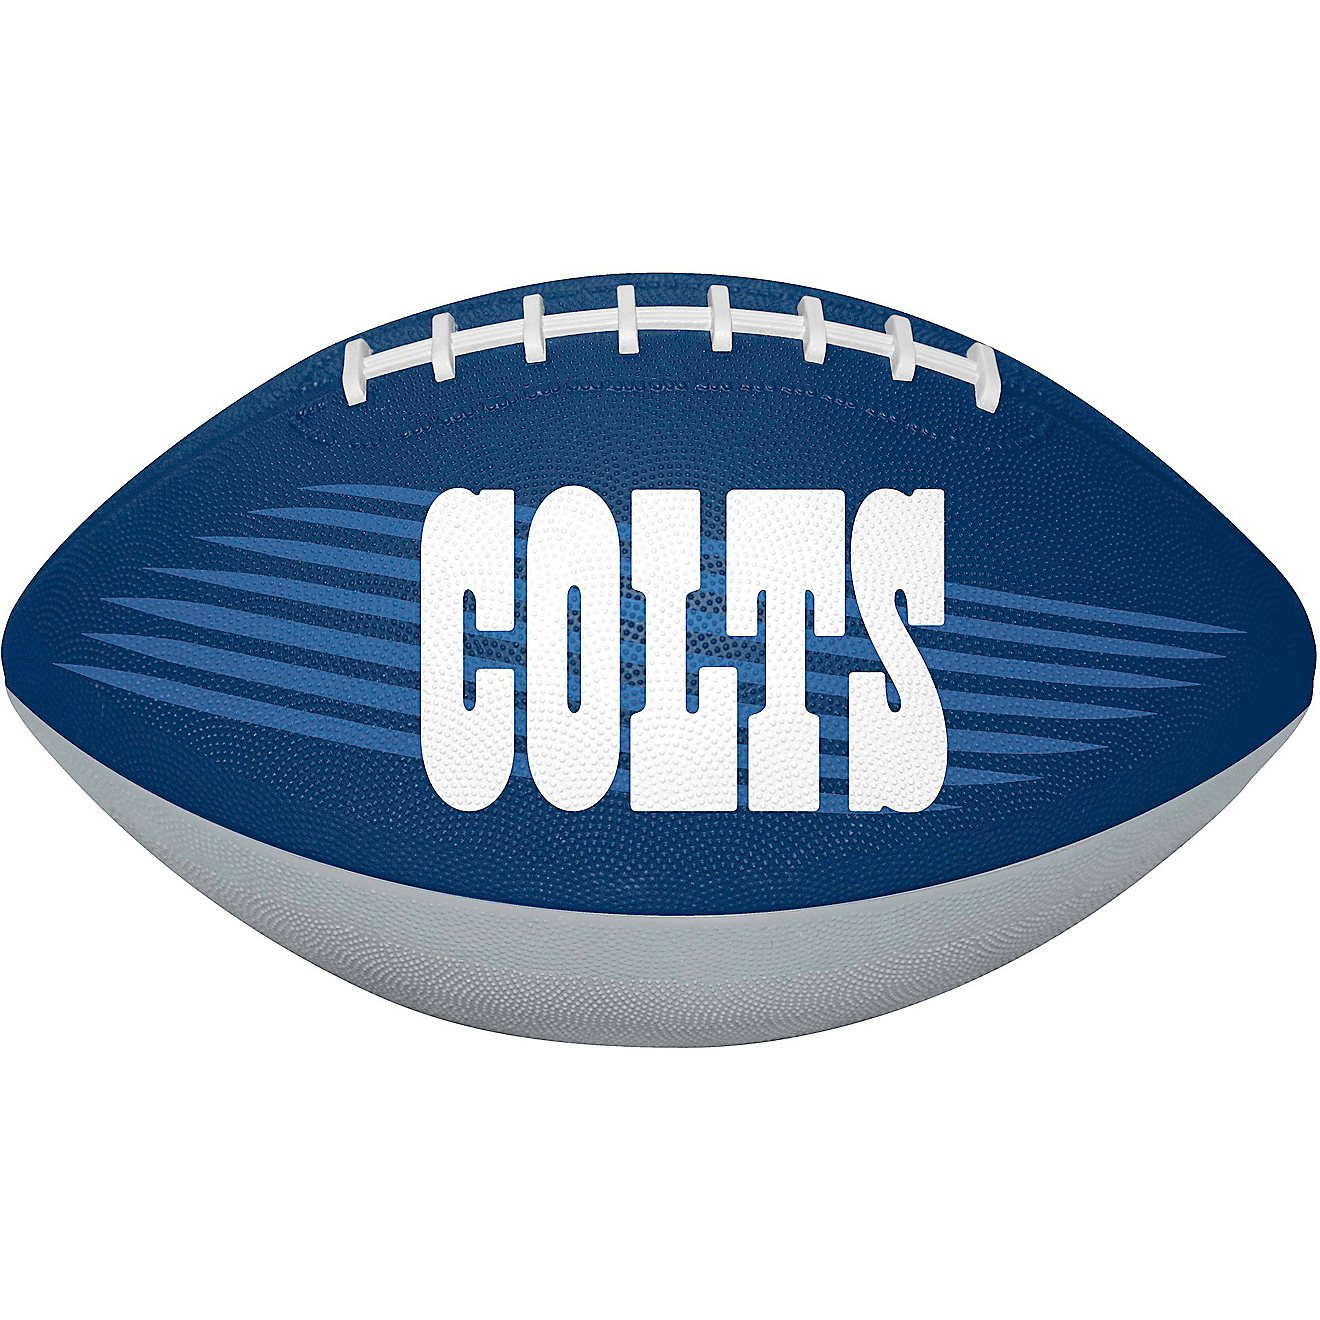 Rawlings Indianapolis Colts Downfield Youth Rubber Football                                                                      - view number 2